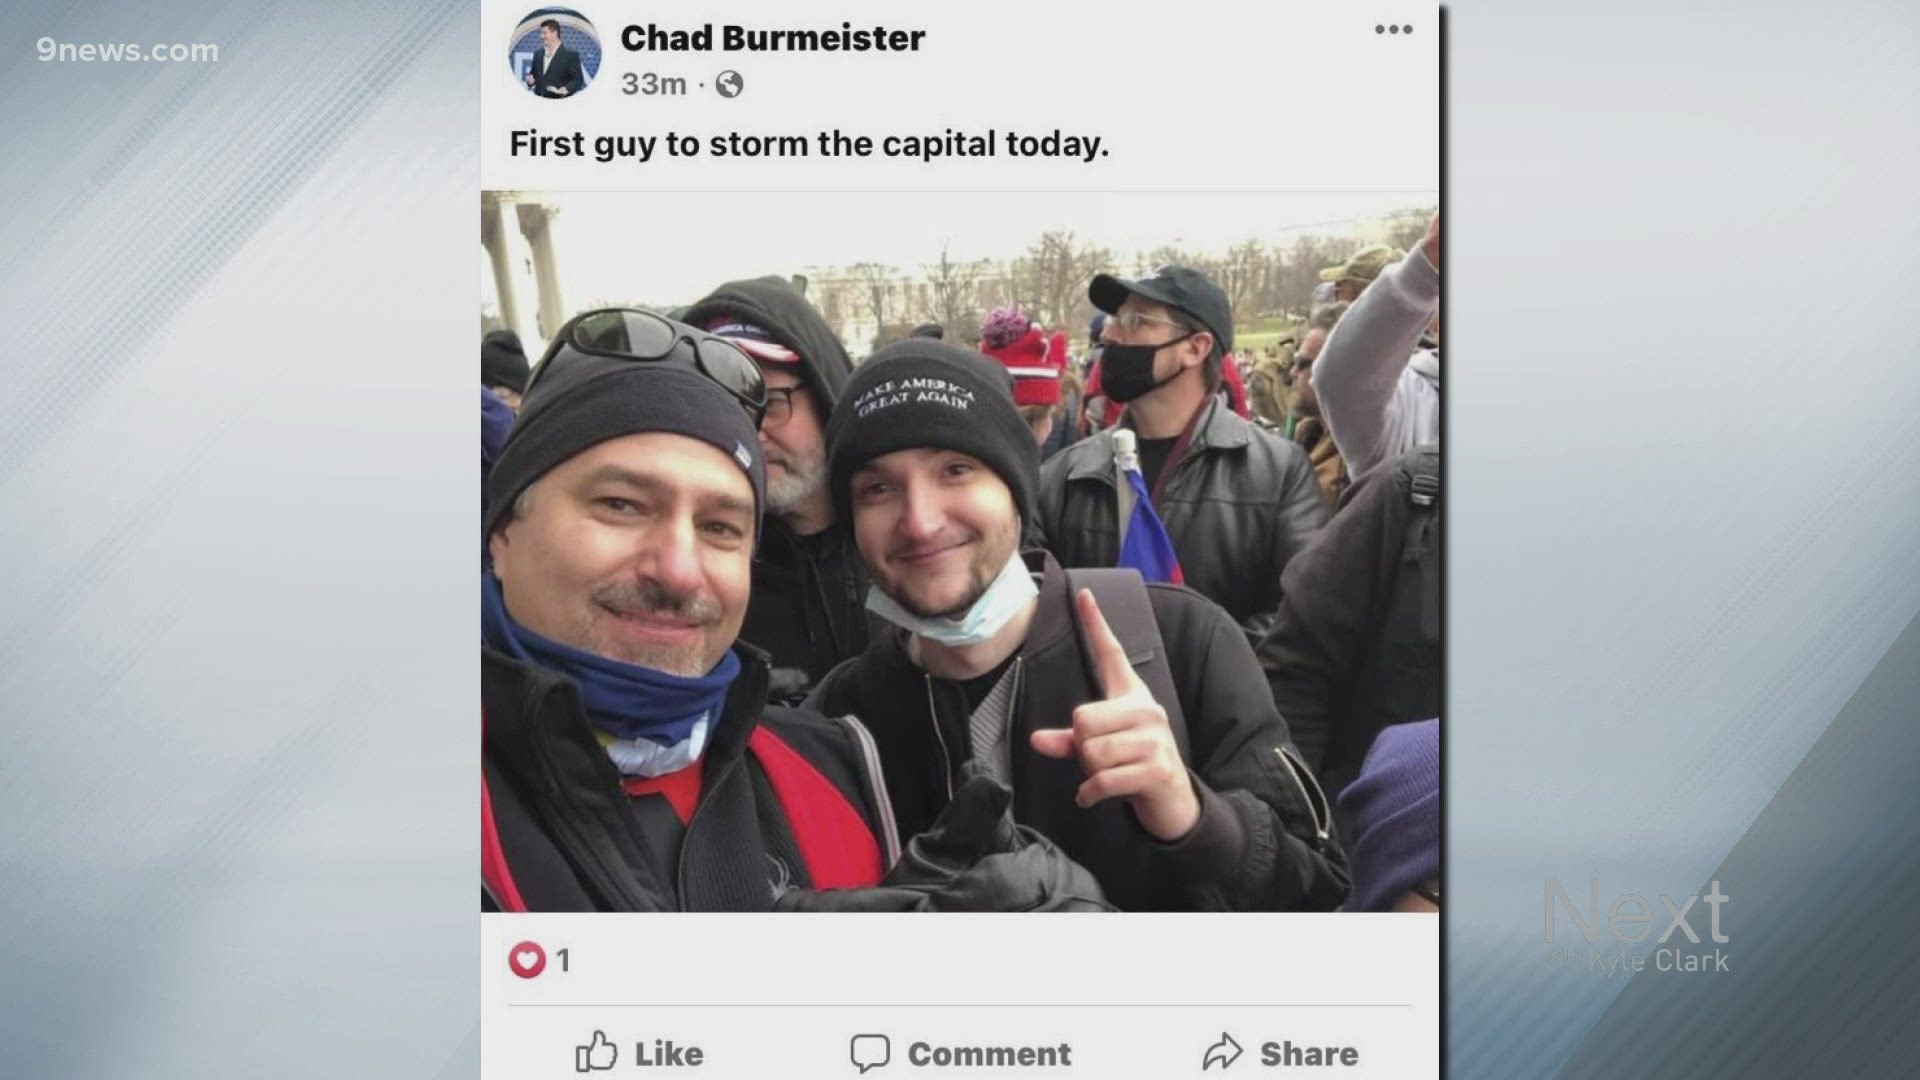 Republican Rep. Mark Baisley pointed to Antifa without evidence after the insurrection at the Capitol, as a Coloradan who claimed to storm the building heads home.